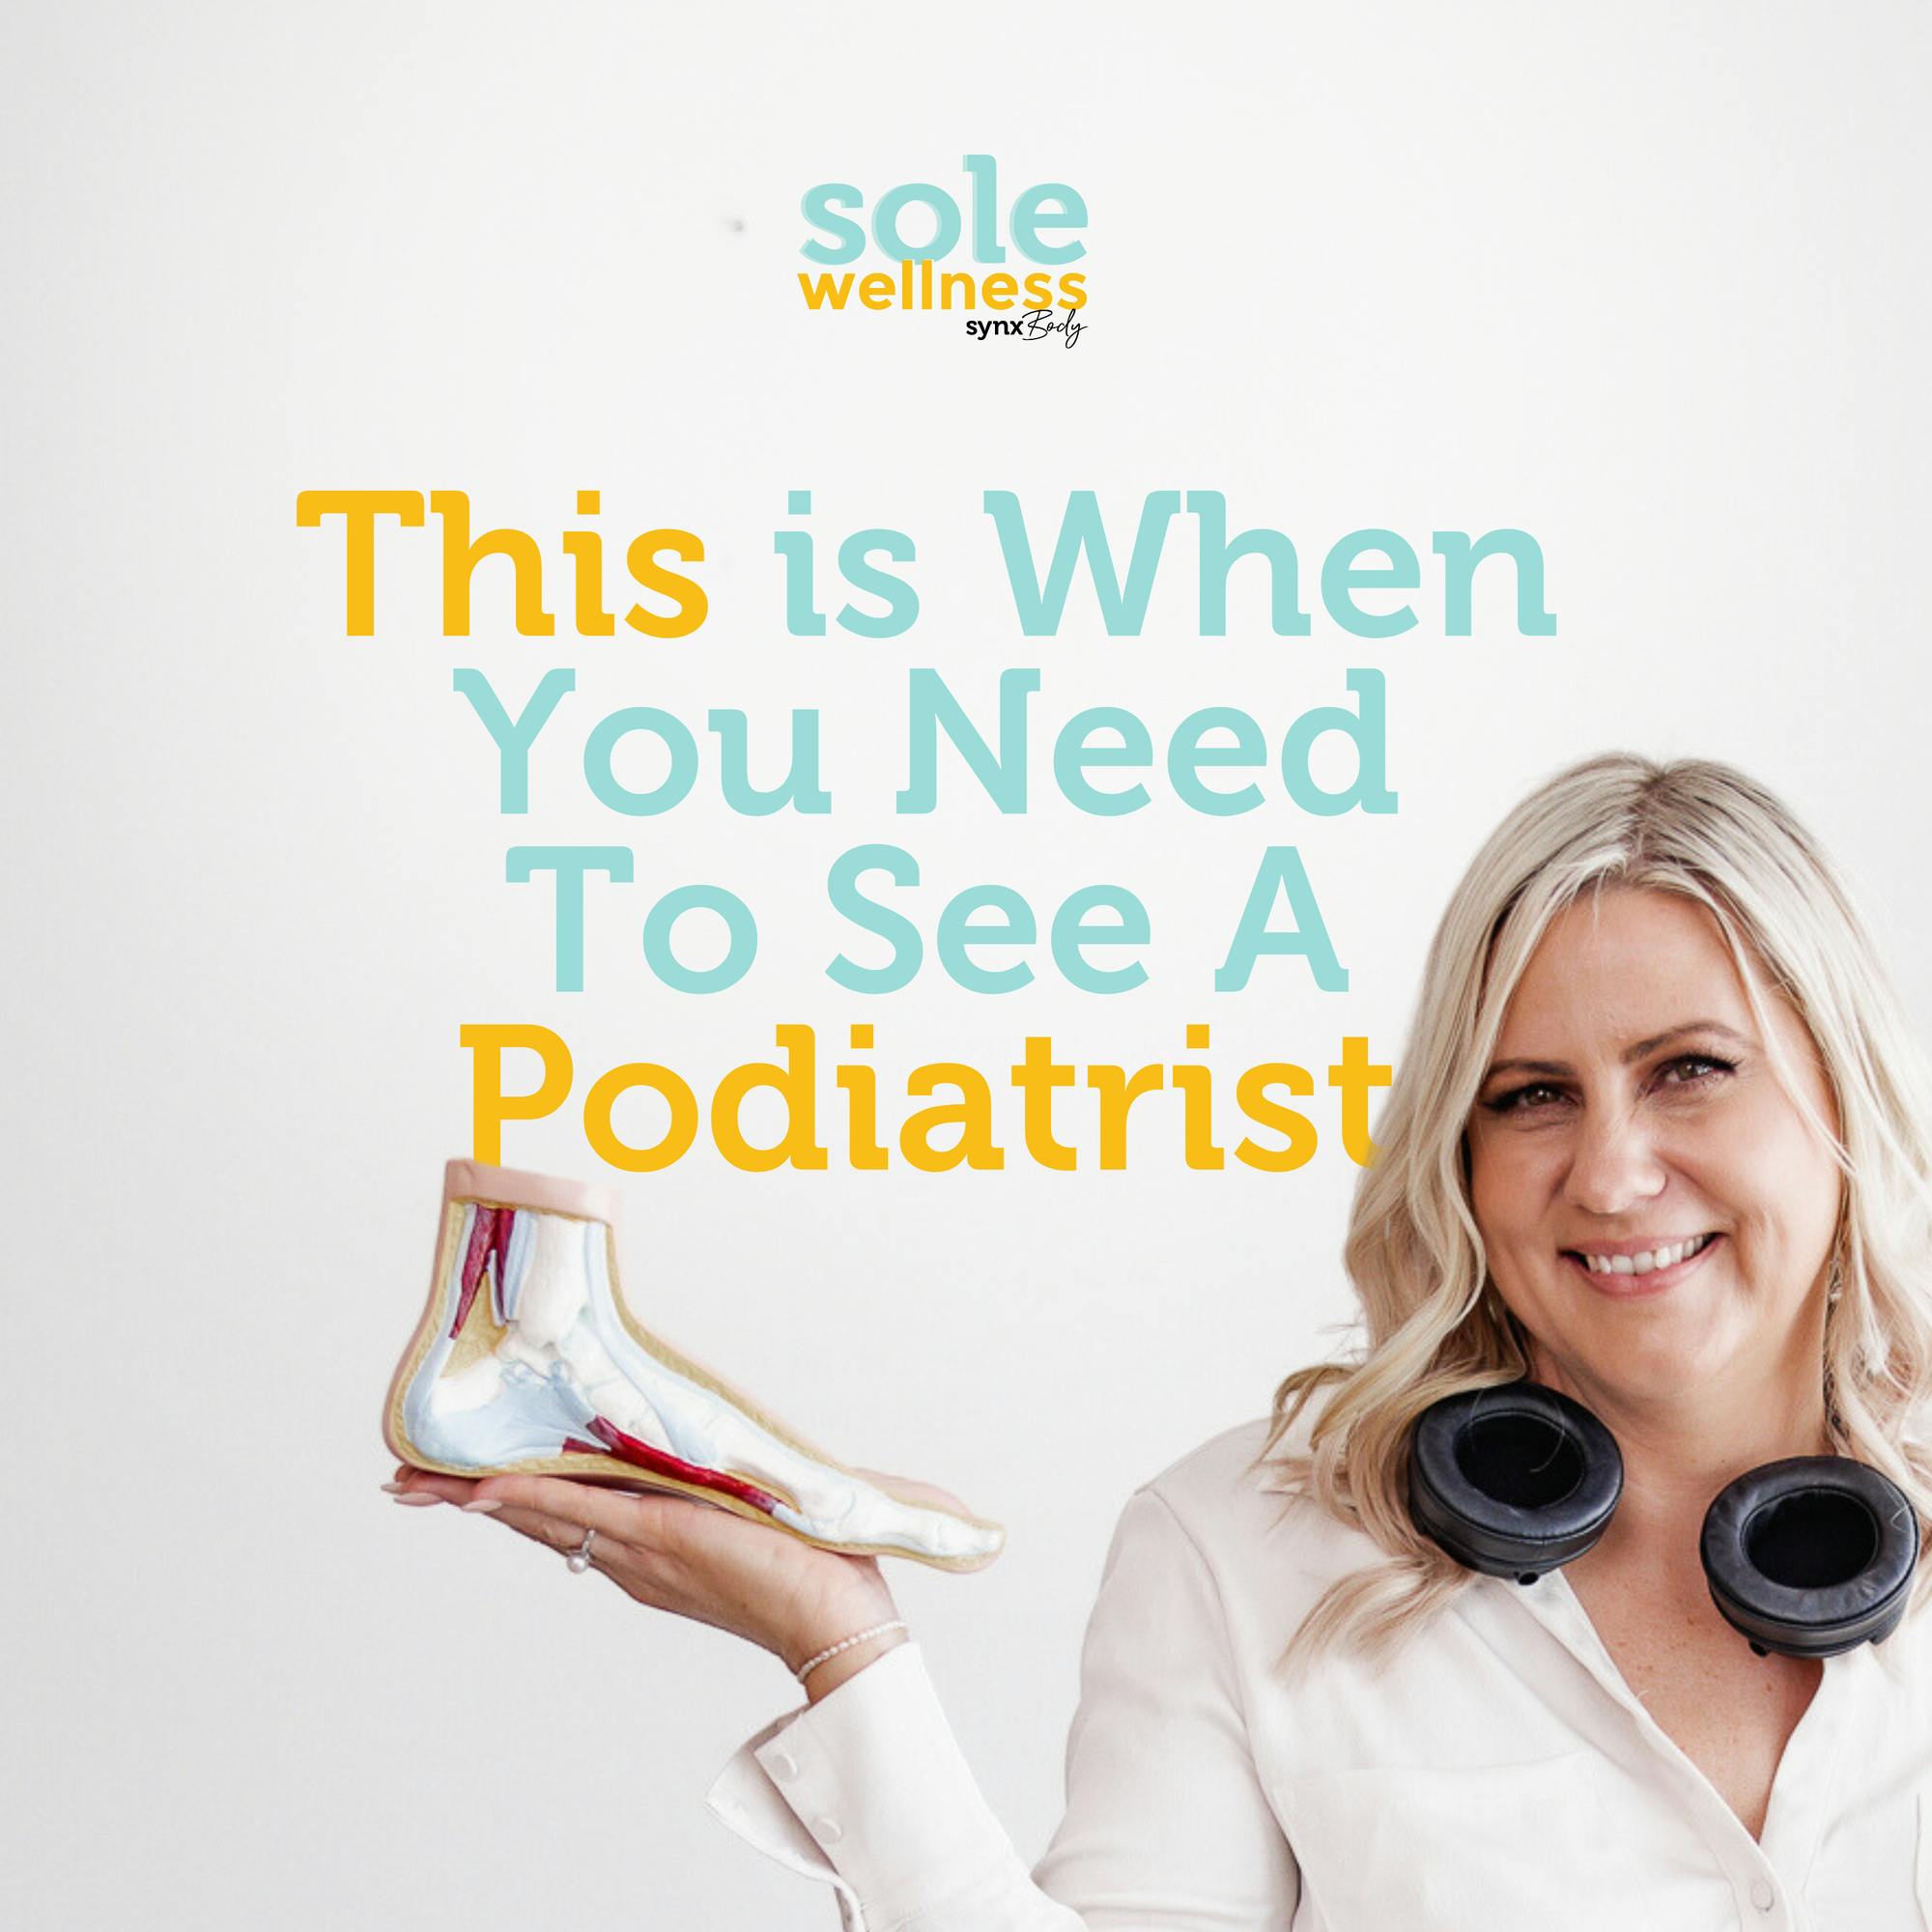 This is When You Need to See a Podiatrist